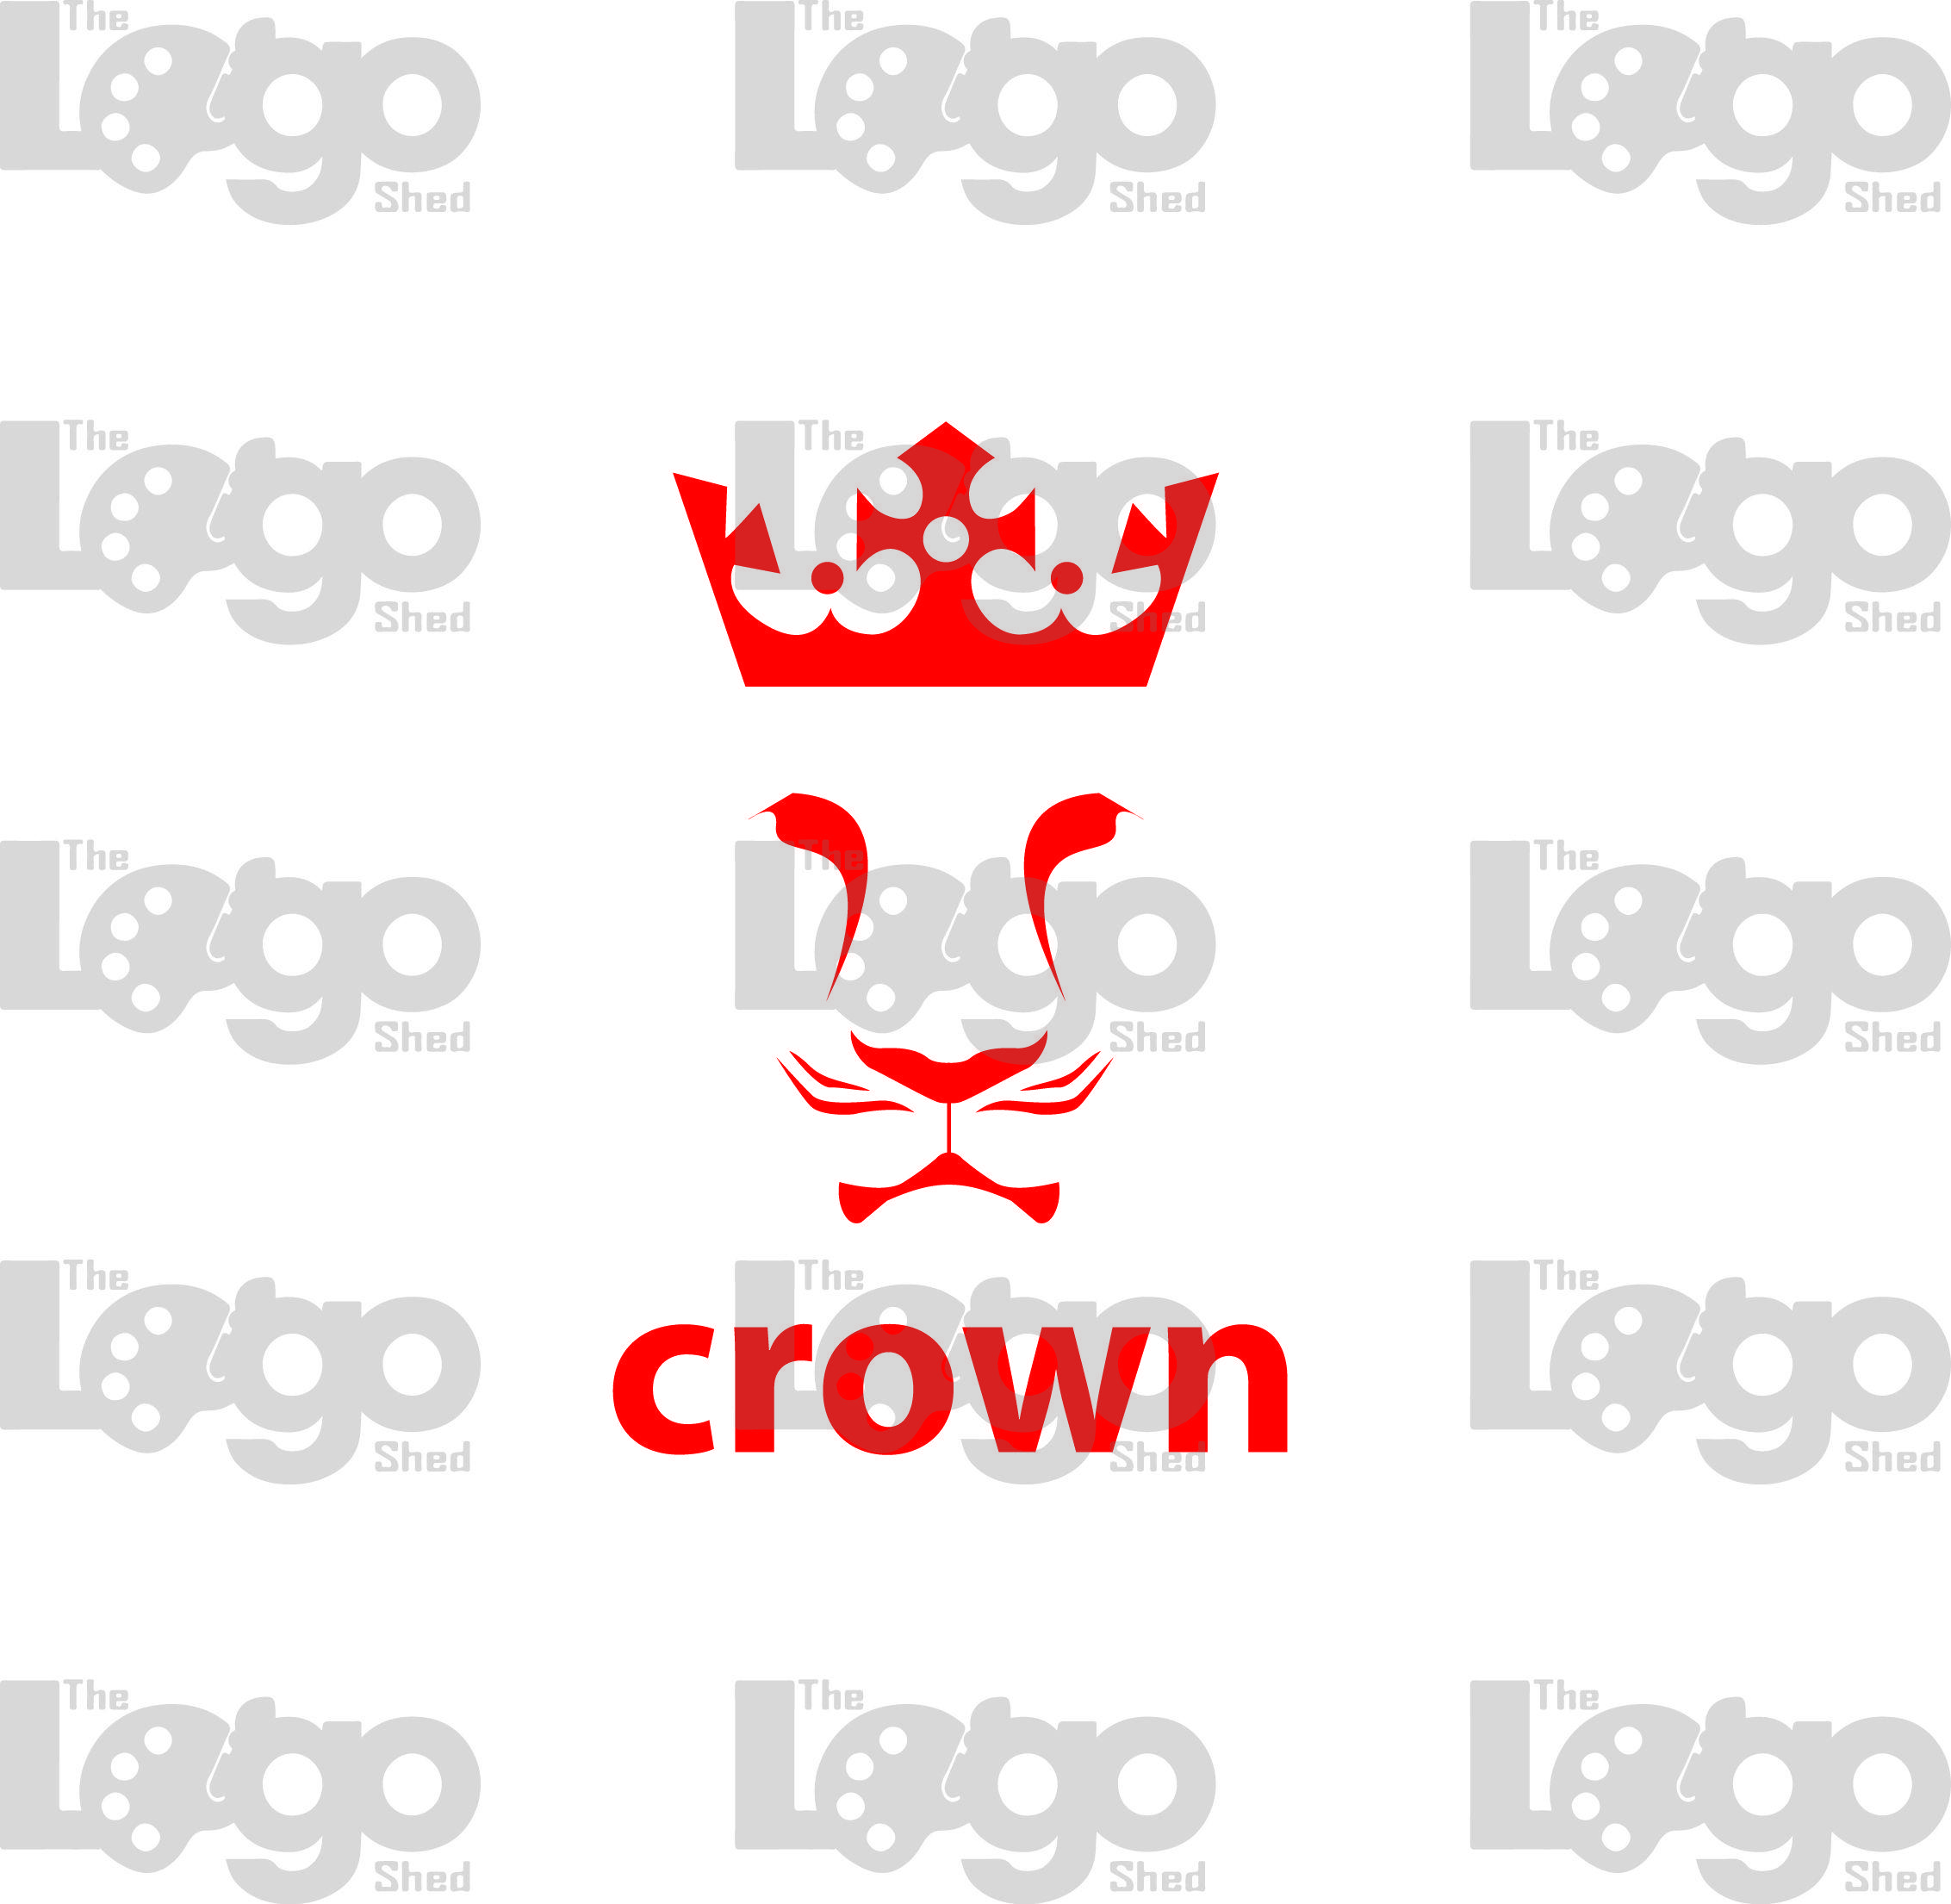 Red Lion with Crown Logo - Red Lion Crown Logo | The Logo Shed